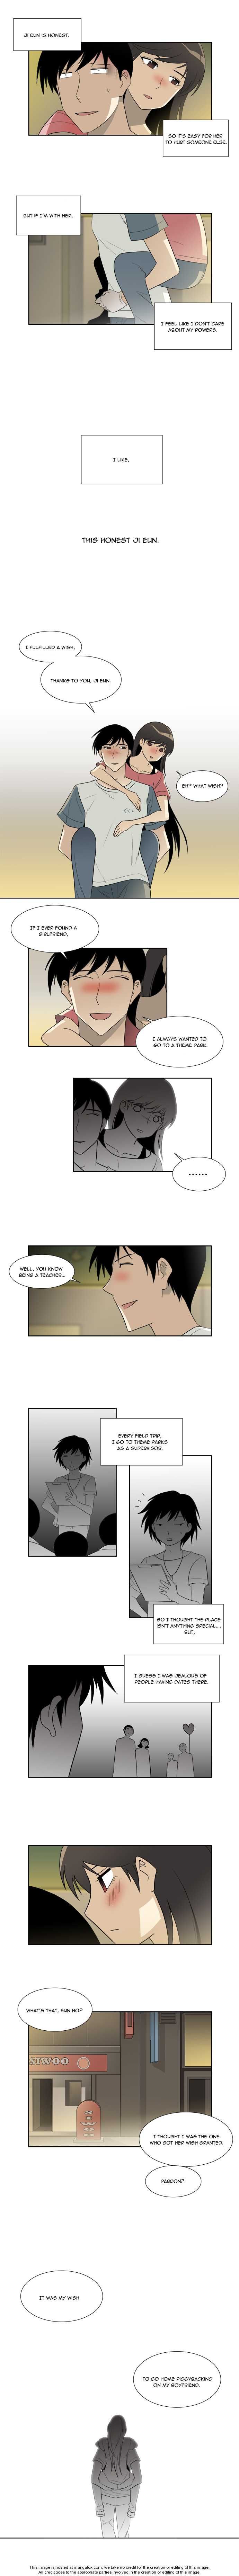 Melo Holic Chapter 028 page 4